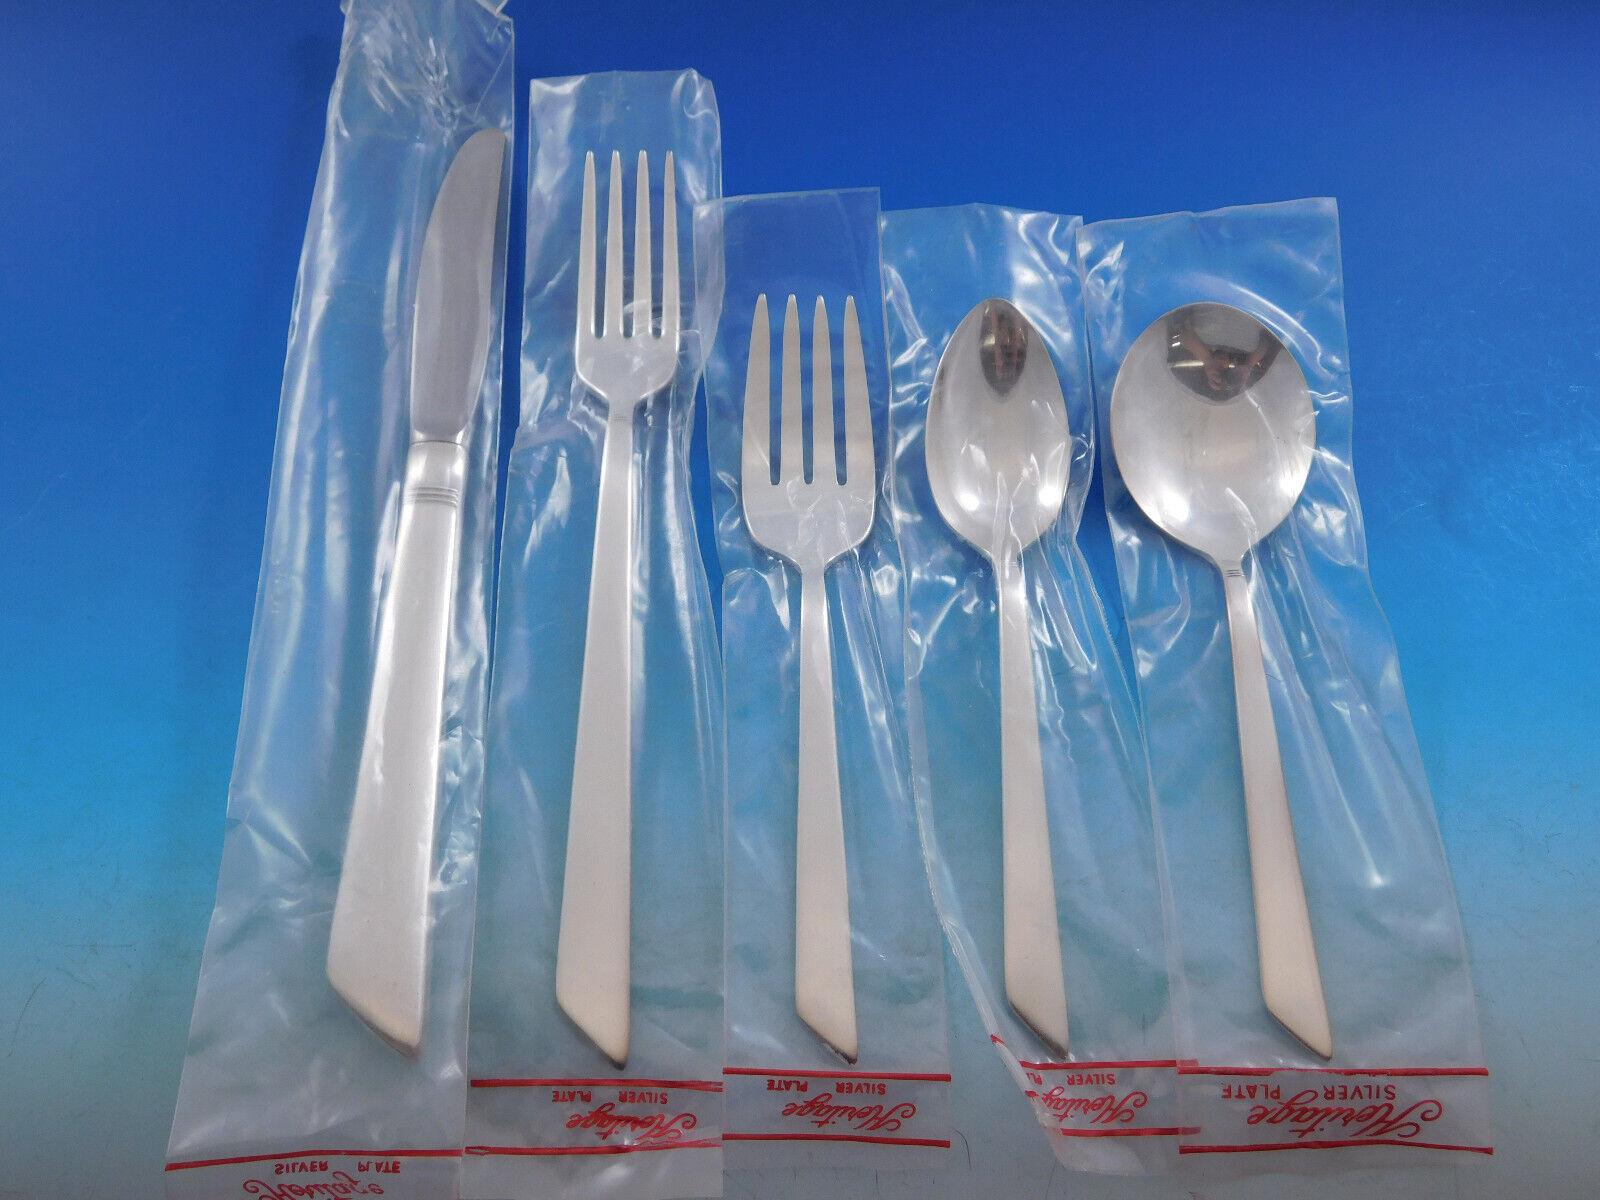 New, unused Silver Willow by Heritage China, modern design silverplated Flatware set, 49 pieces. This set includes:

8 Knives, 8 3/4